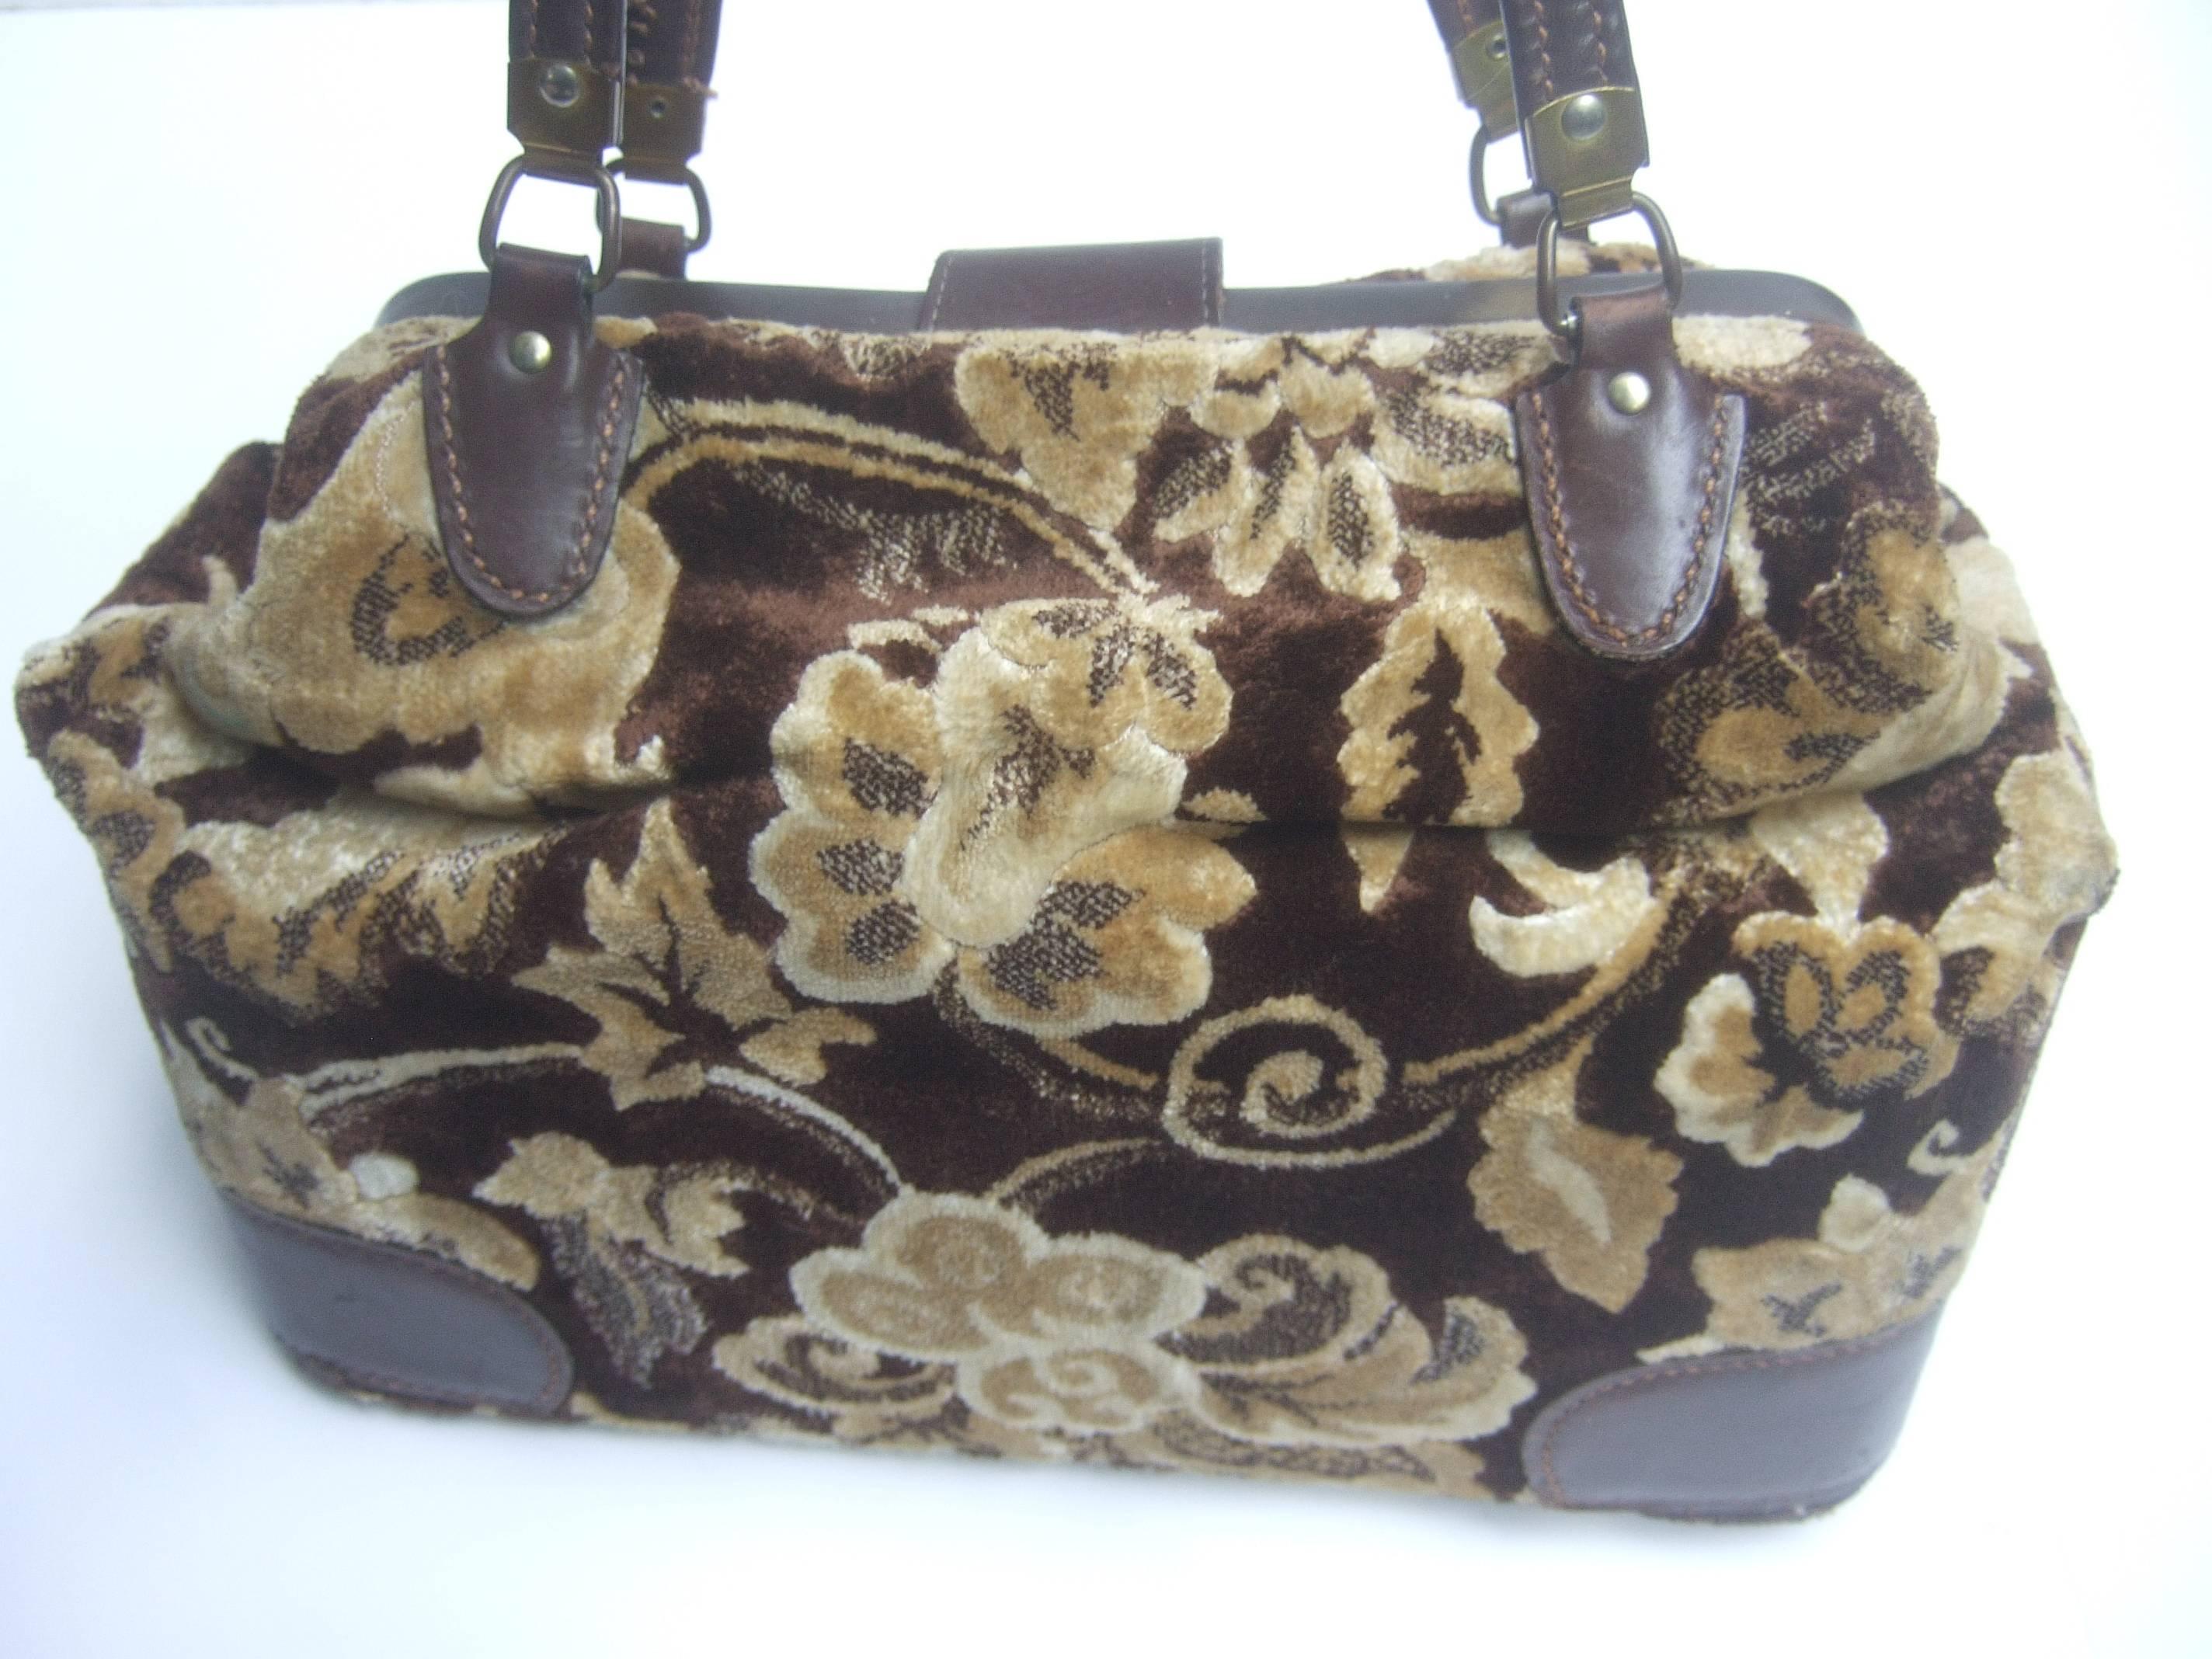 Stylish Brocade Leather Trim Travel Bag c 1970 In Good Condition For Sale In University City, MO